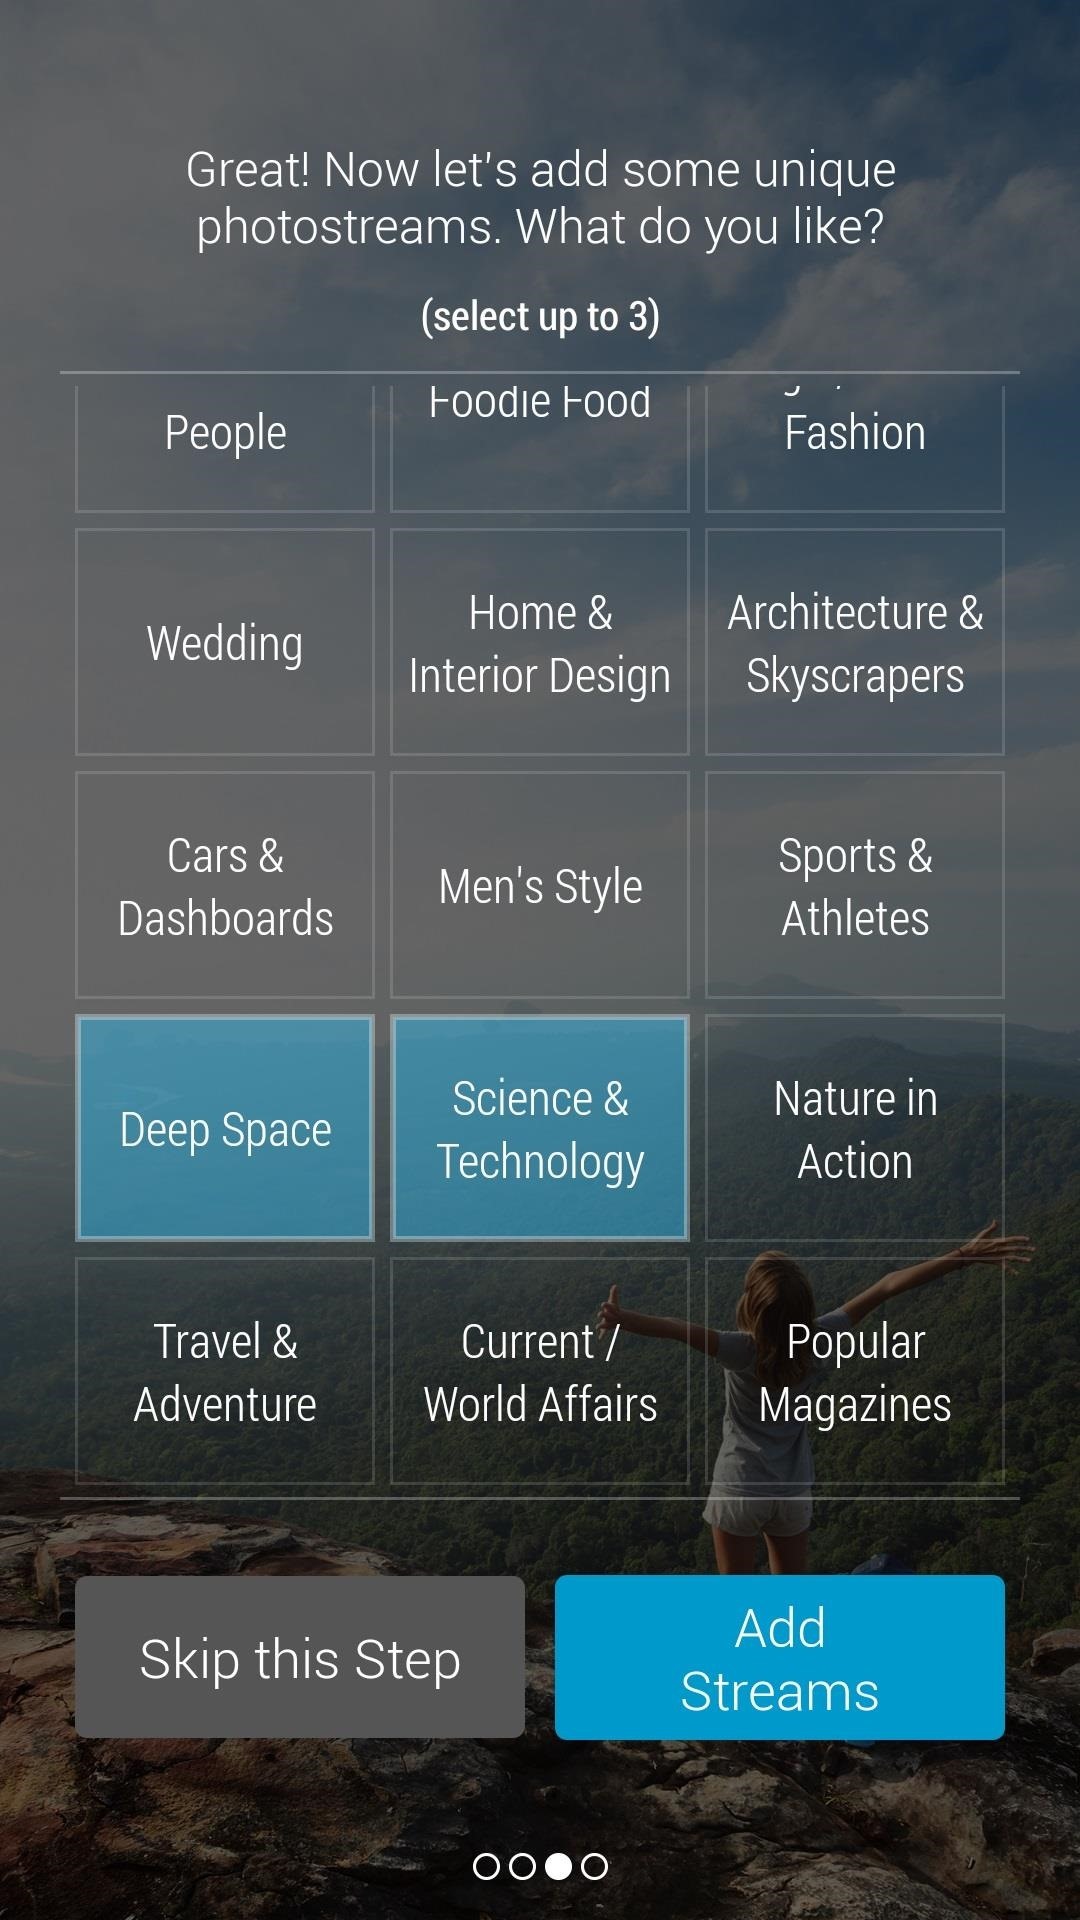 How to Turn Your Favorite Pics from Instagram, Tumblr, & More into Daydreams on Your Galaxy Note 3